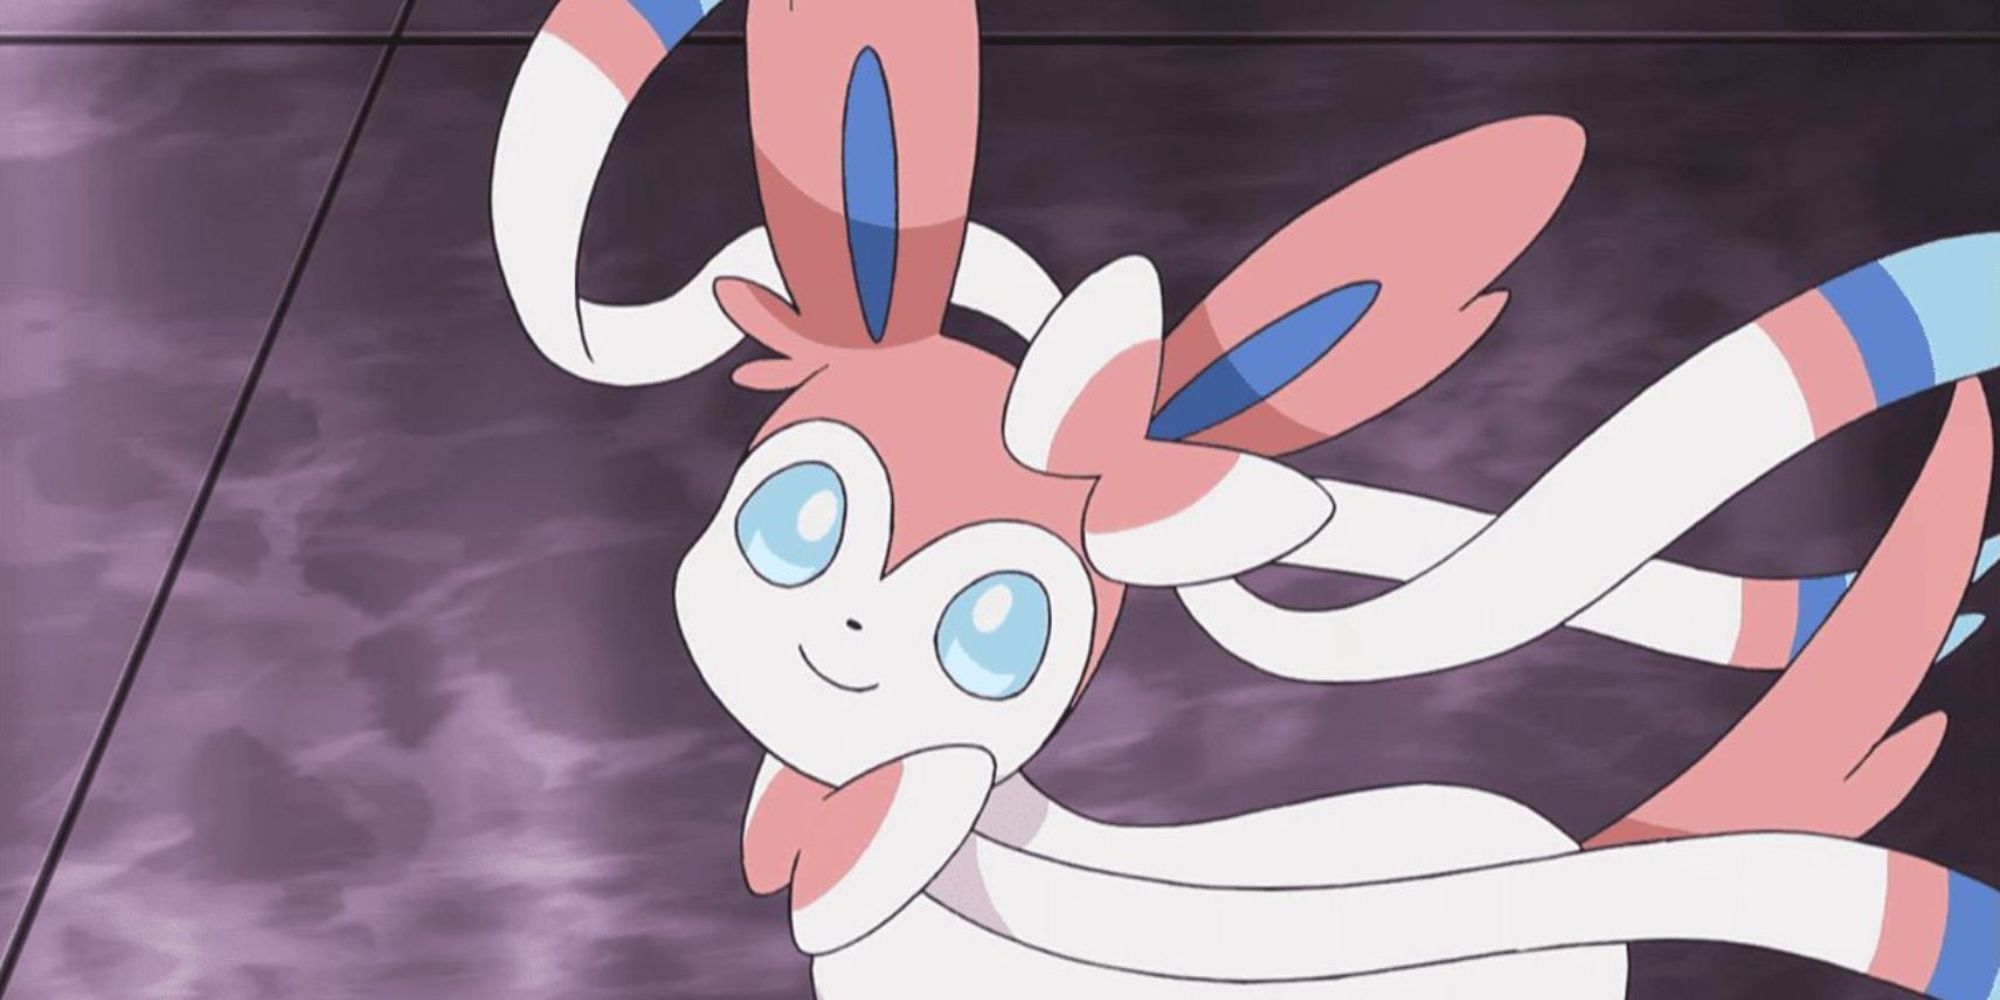 Sylveon looks up with a smile on its face